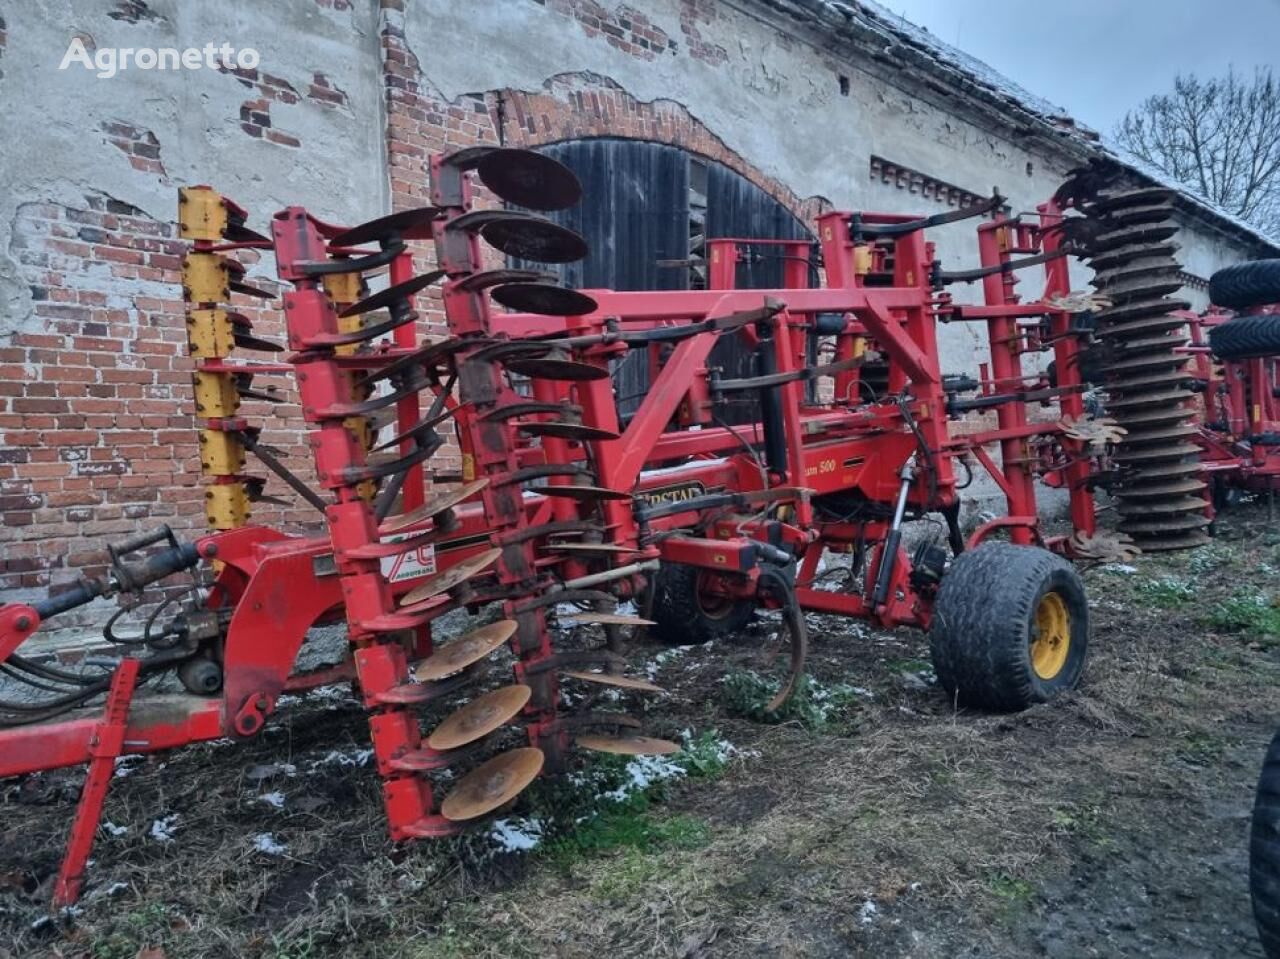 Top Down 500 cultivator